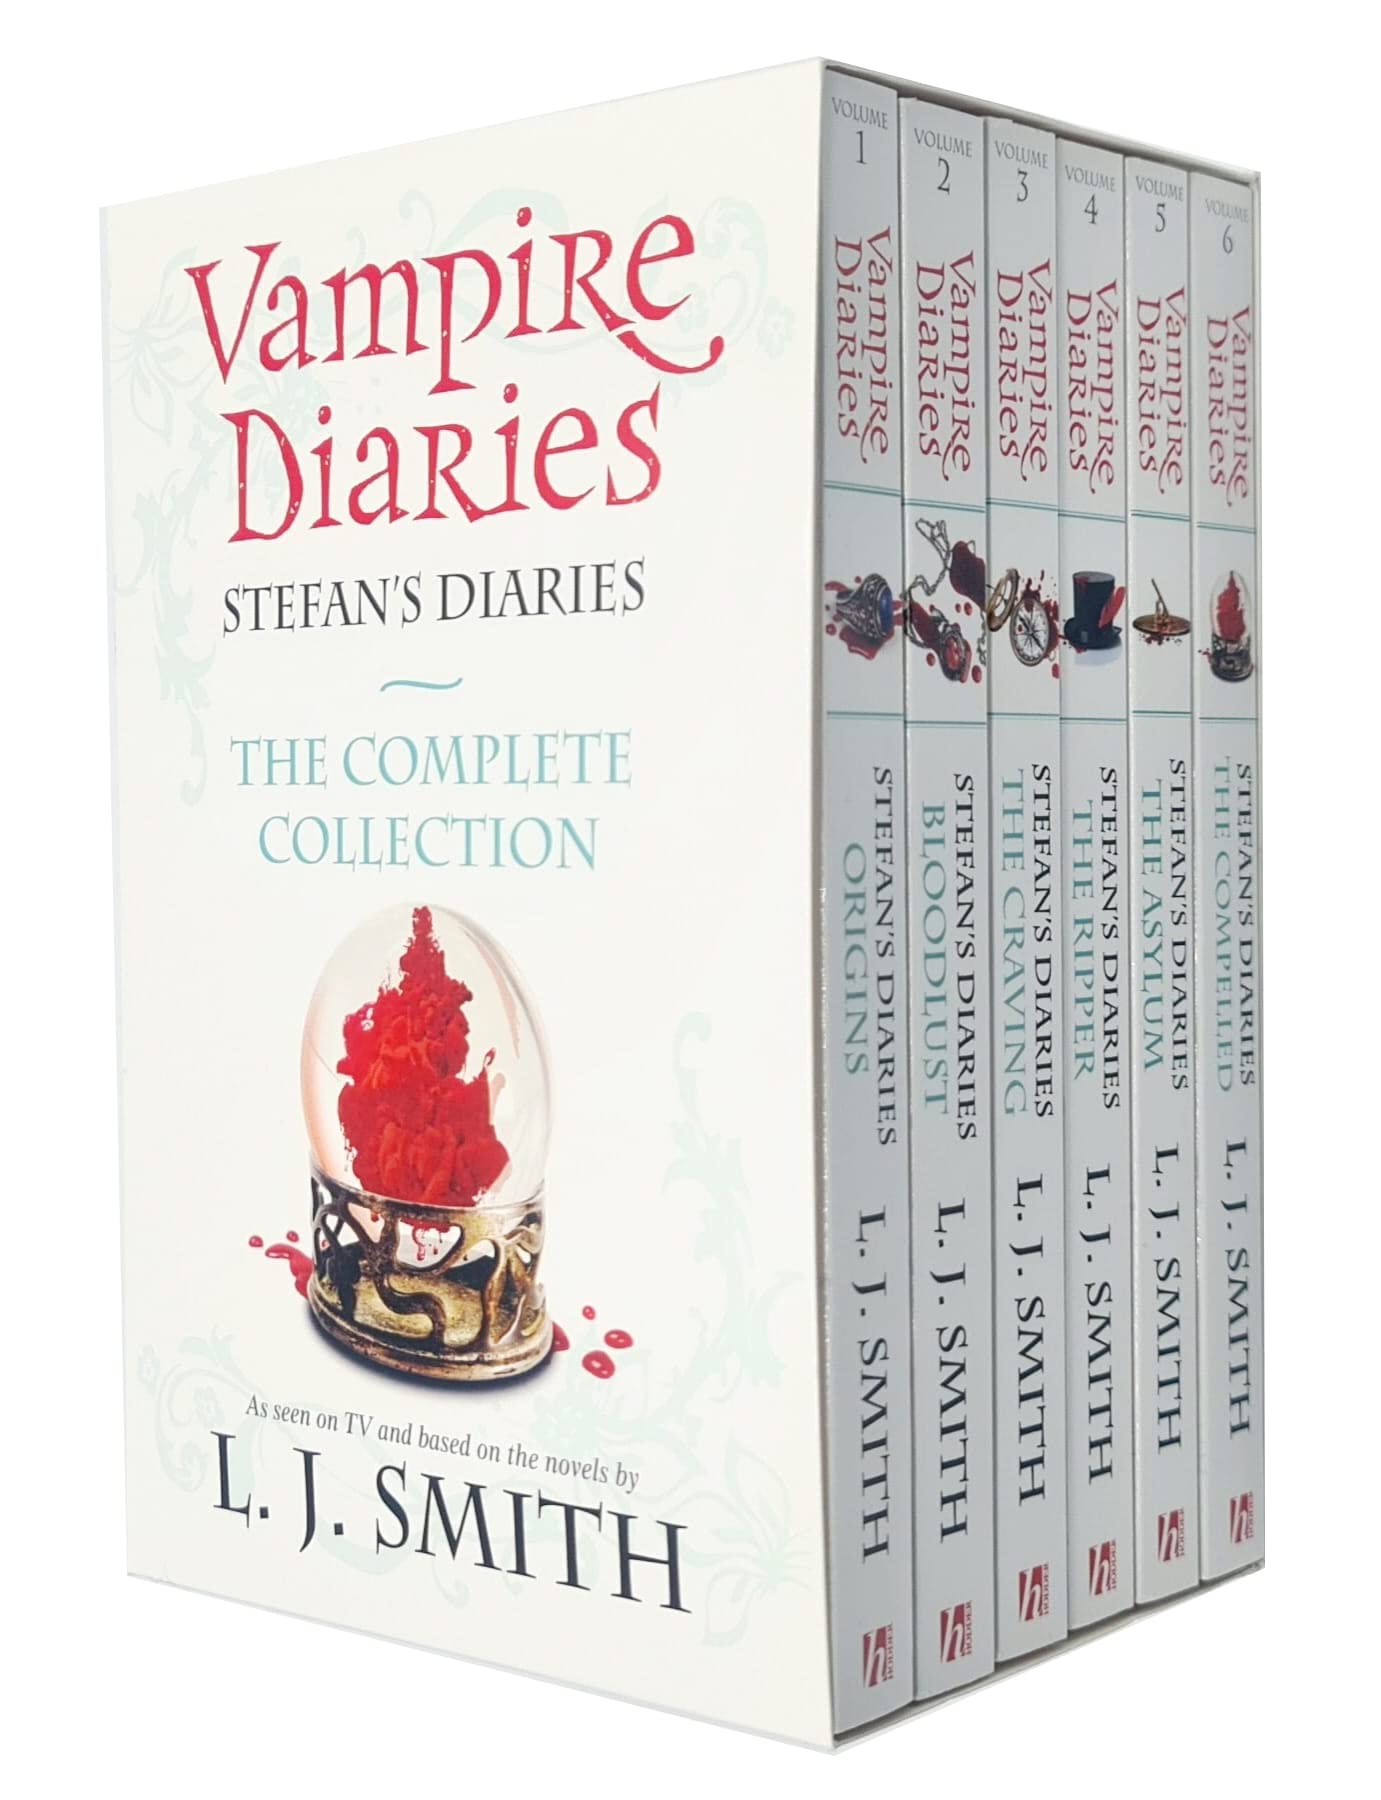 Vampire Diaries Stefans Diaries The Complete Collection Books 1-6 Box Set (Paperback 6권)